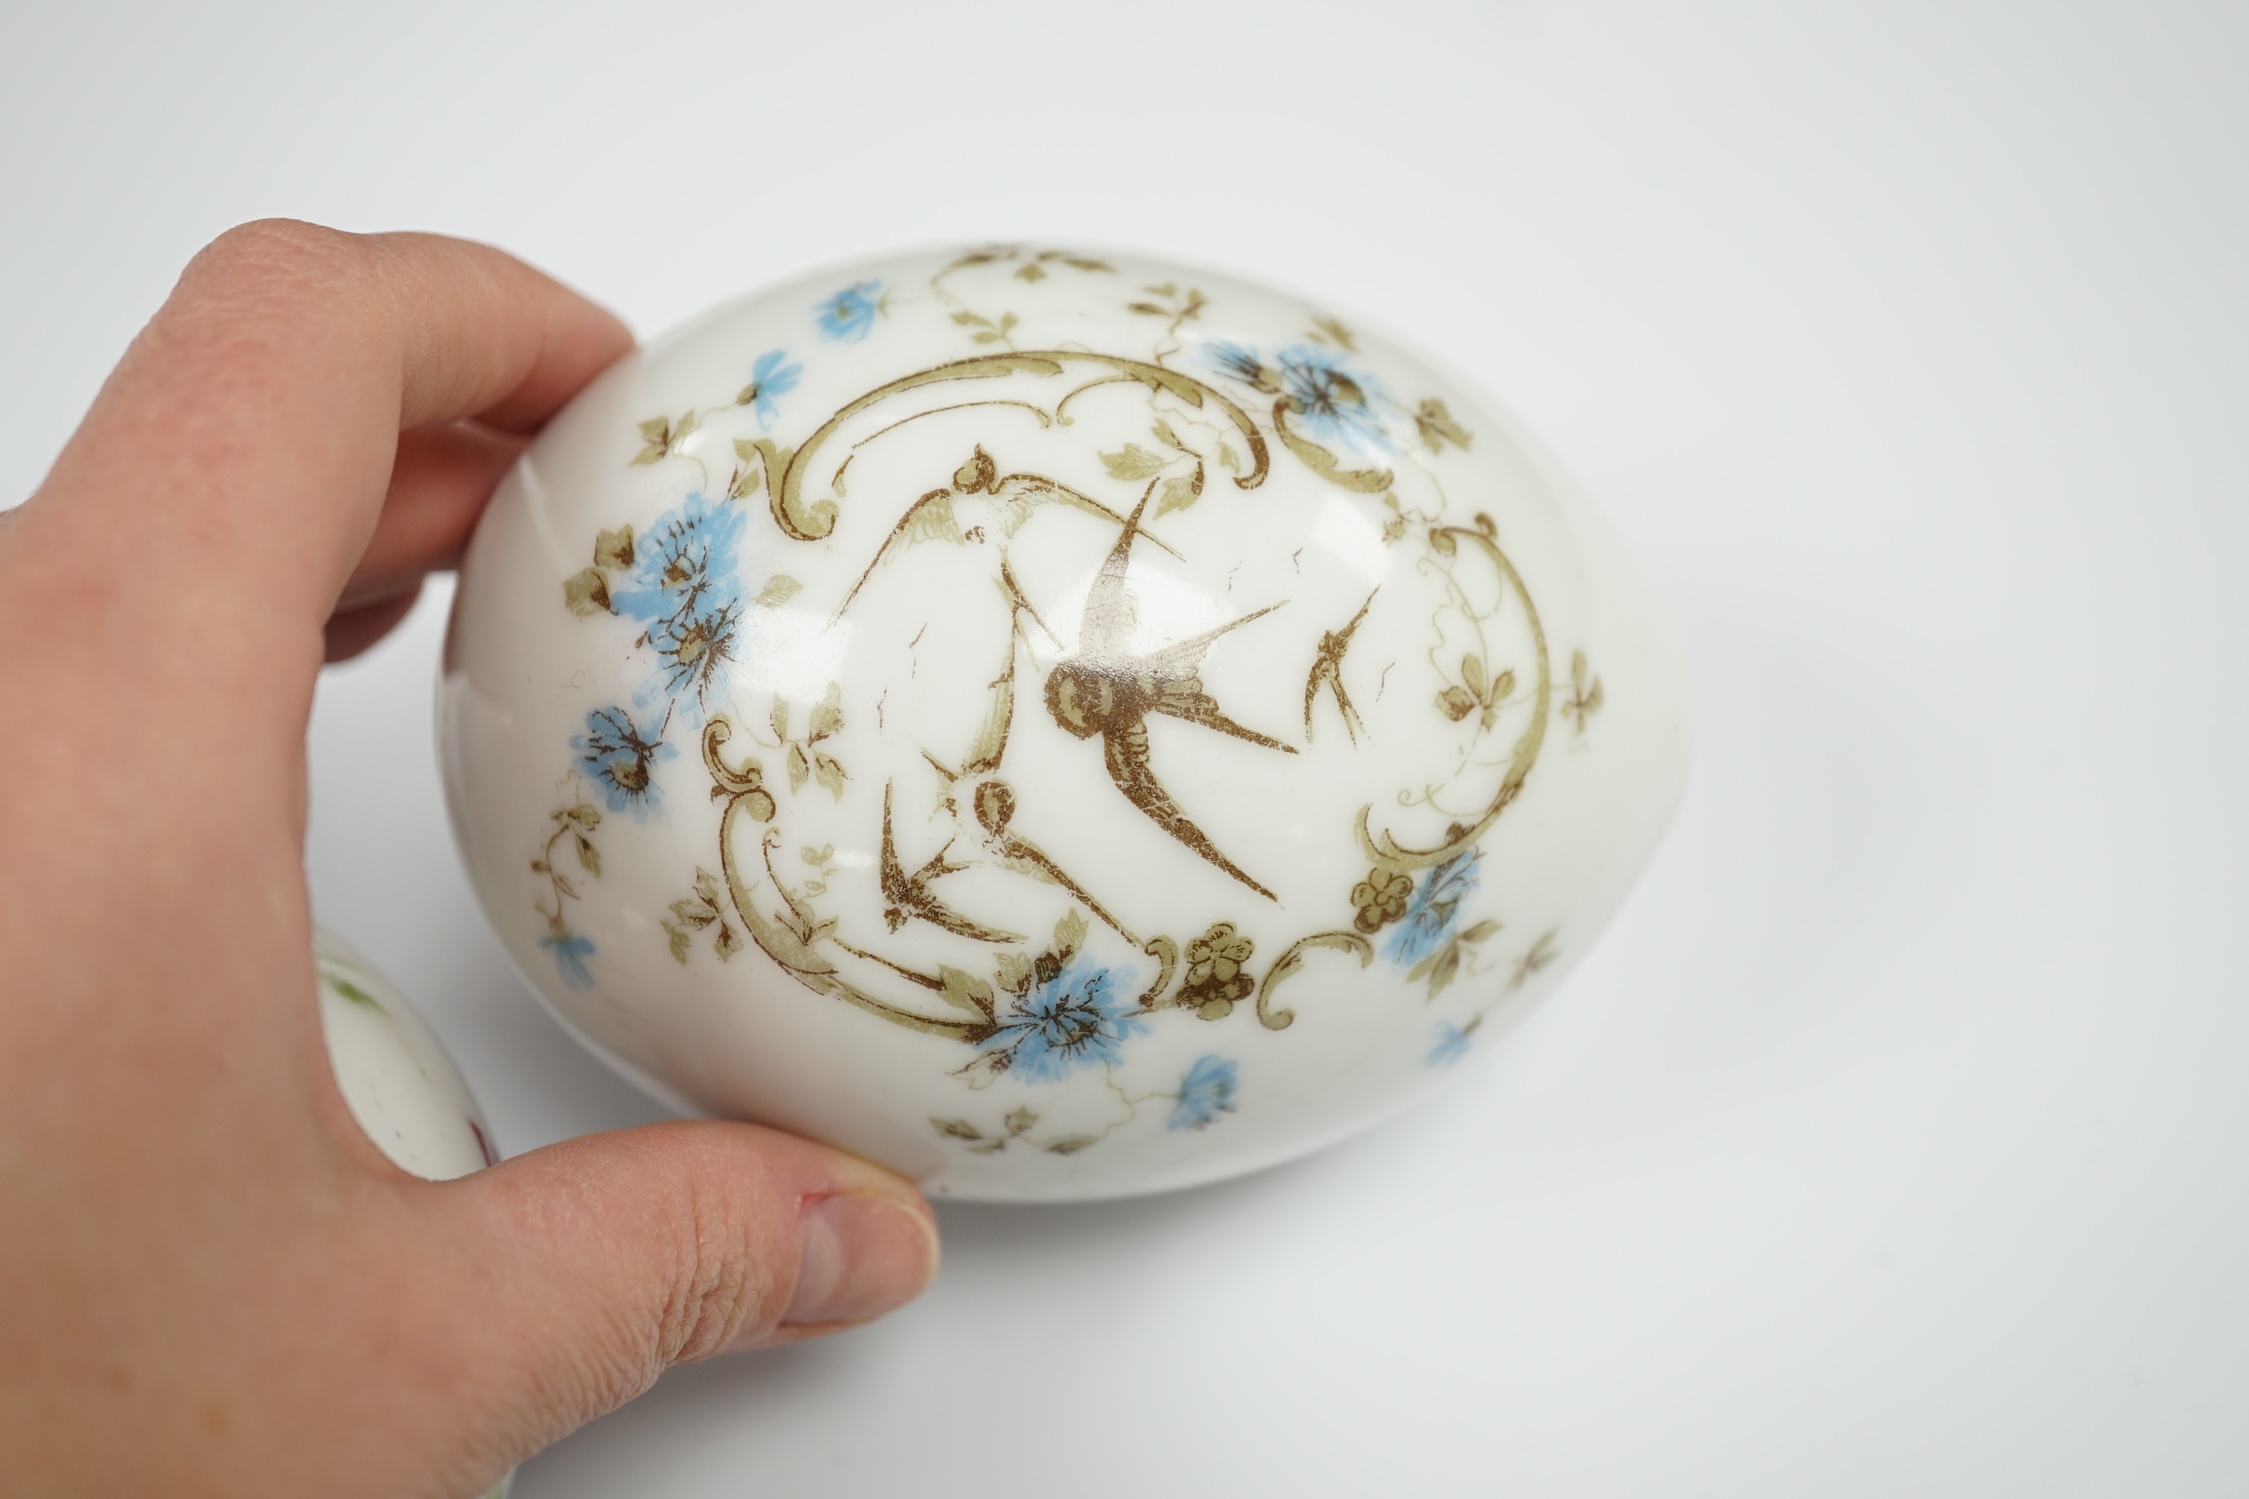 Three Russian porcelain Easter eggs, 19th century, 11cm in length - Image 3 of 3